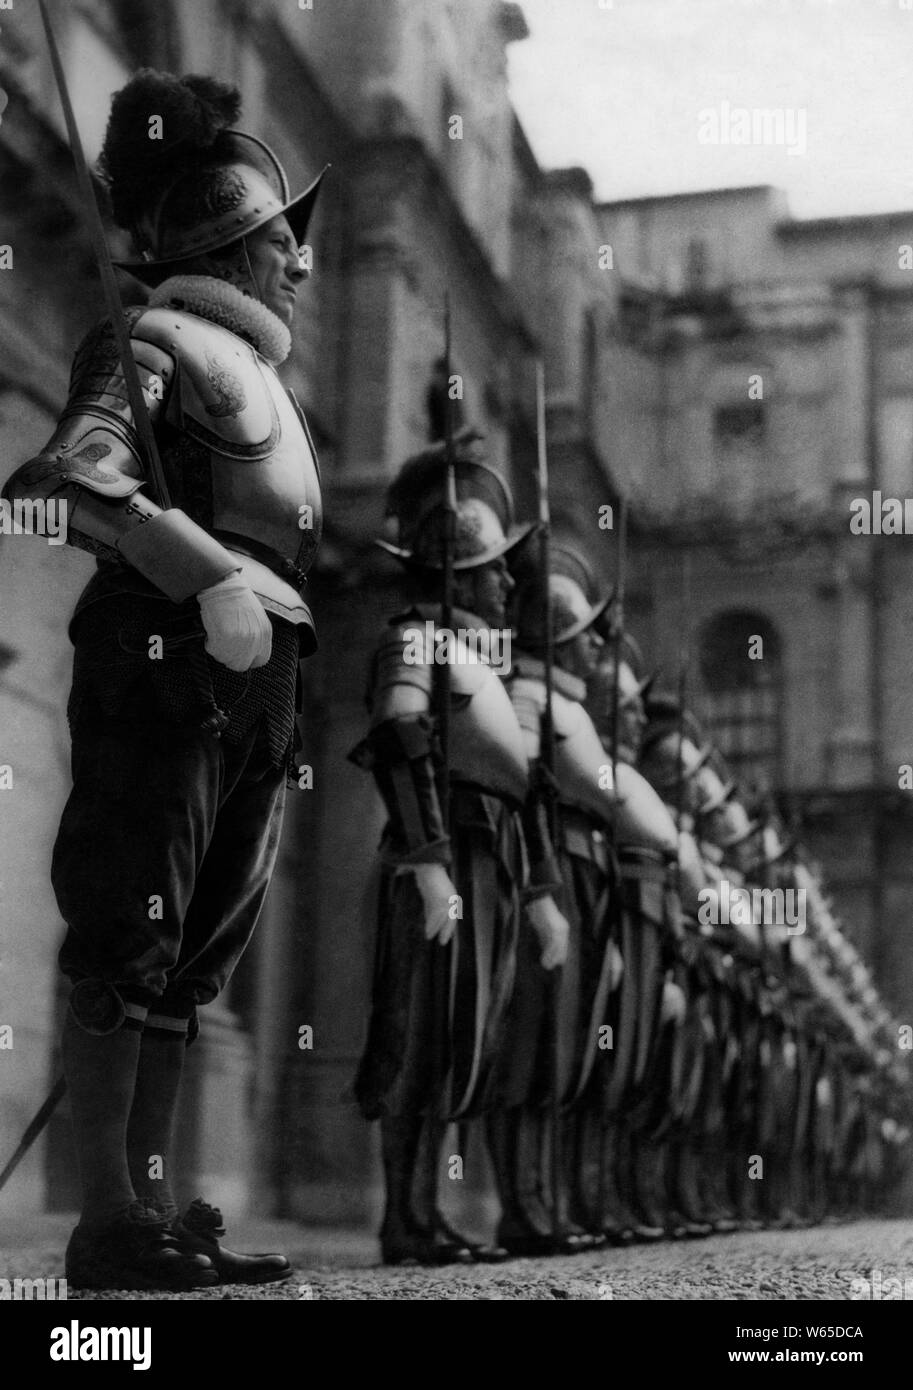 Swiss guards of the Vatican, 1952 Stock Photo